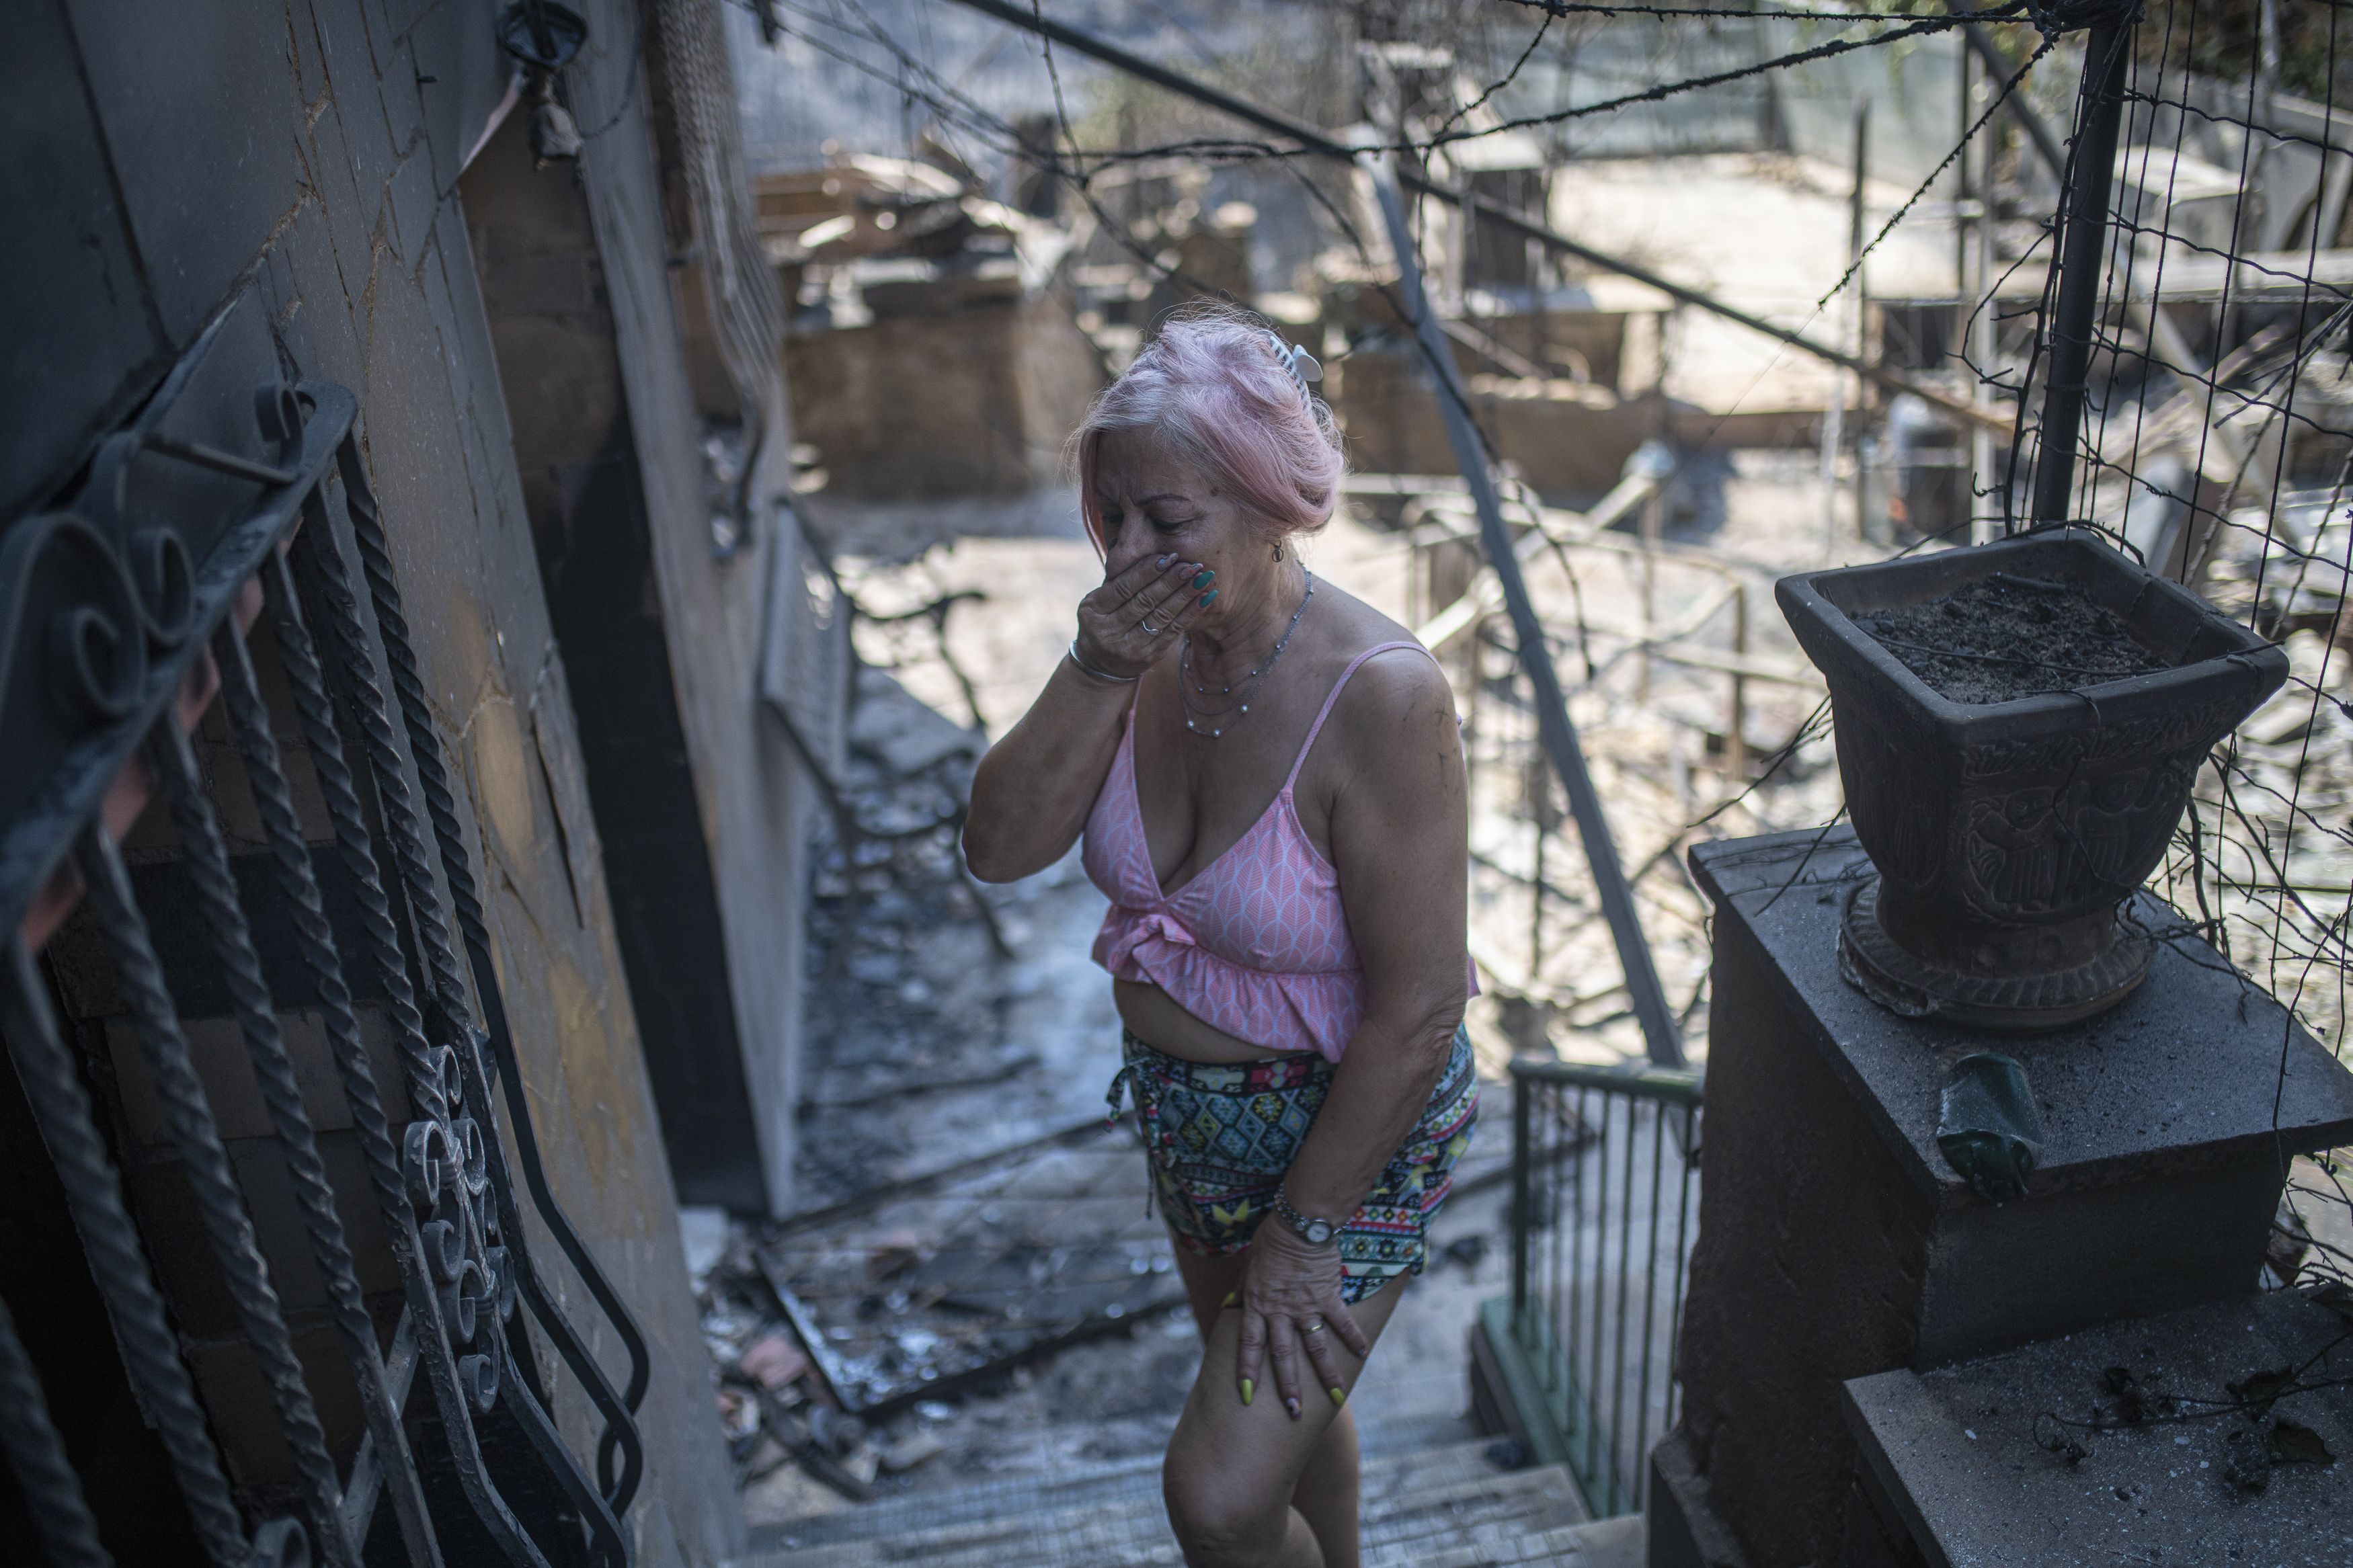 A woman cries at the state of her home affected by the fire, in the River Park urbanization, on 19 July, 2022 in Pont de Vilomara, Barcelona, Catalonia, Spain